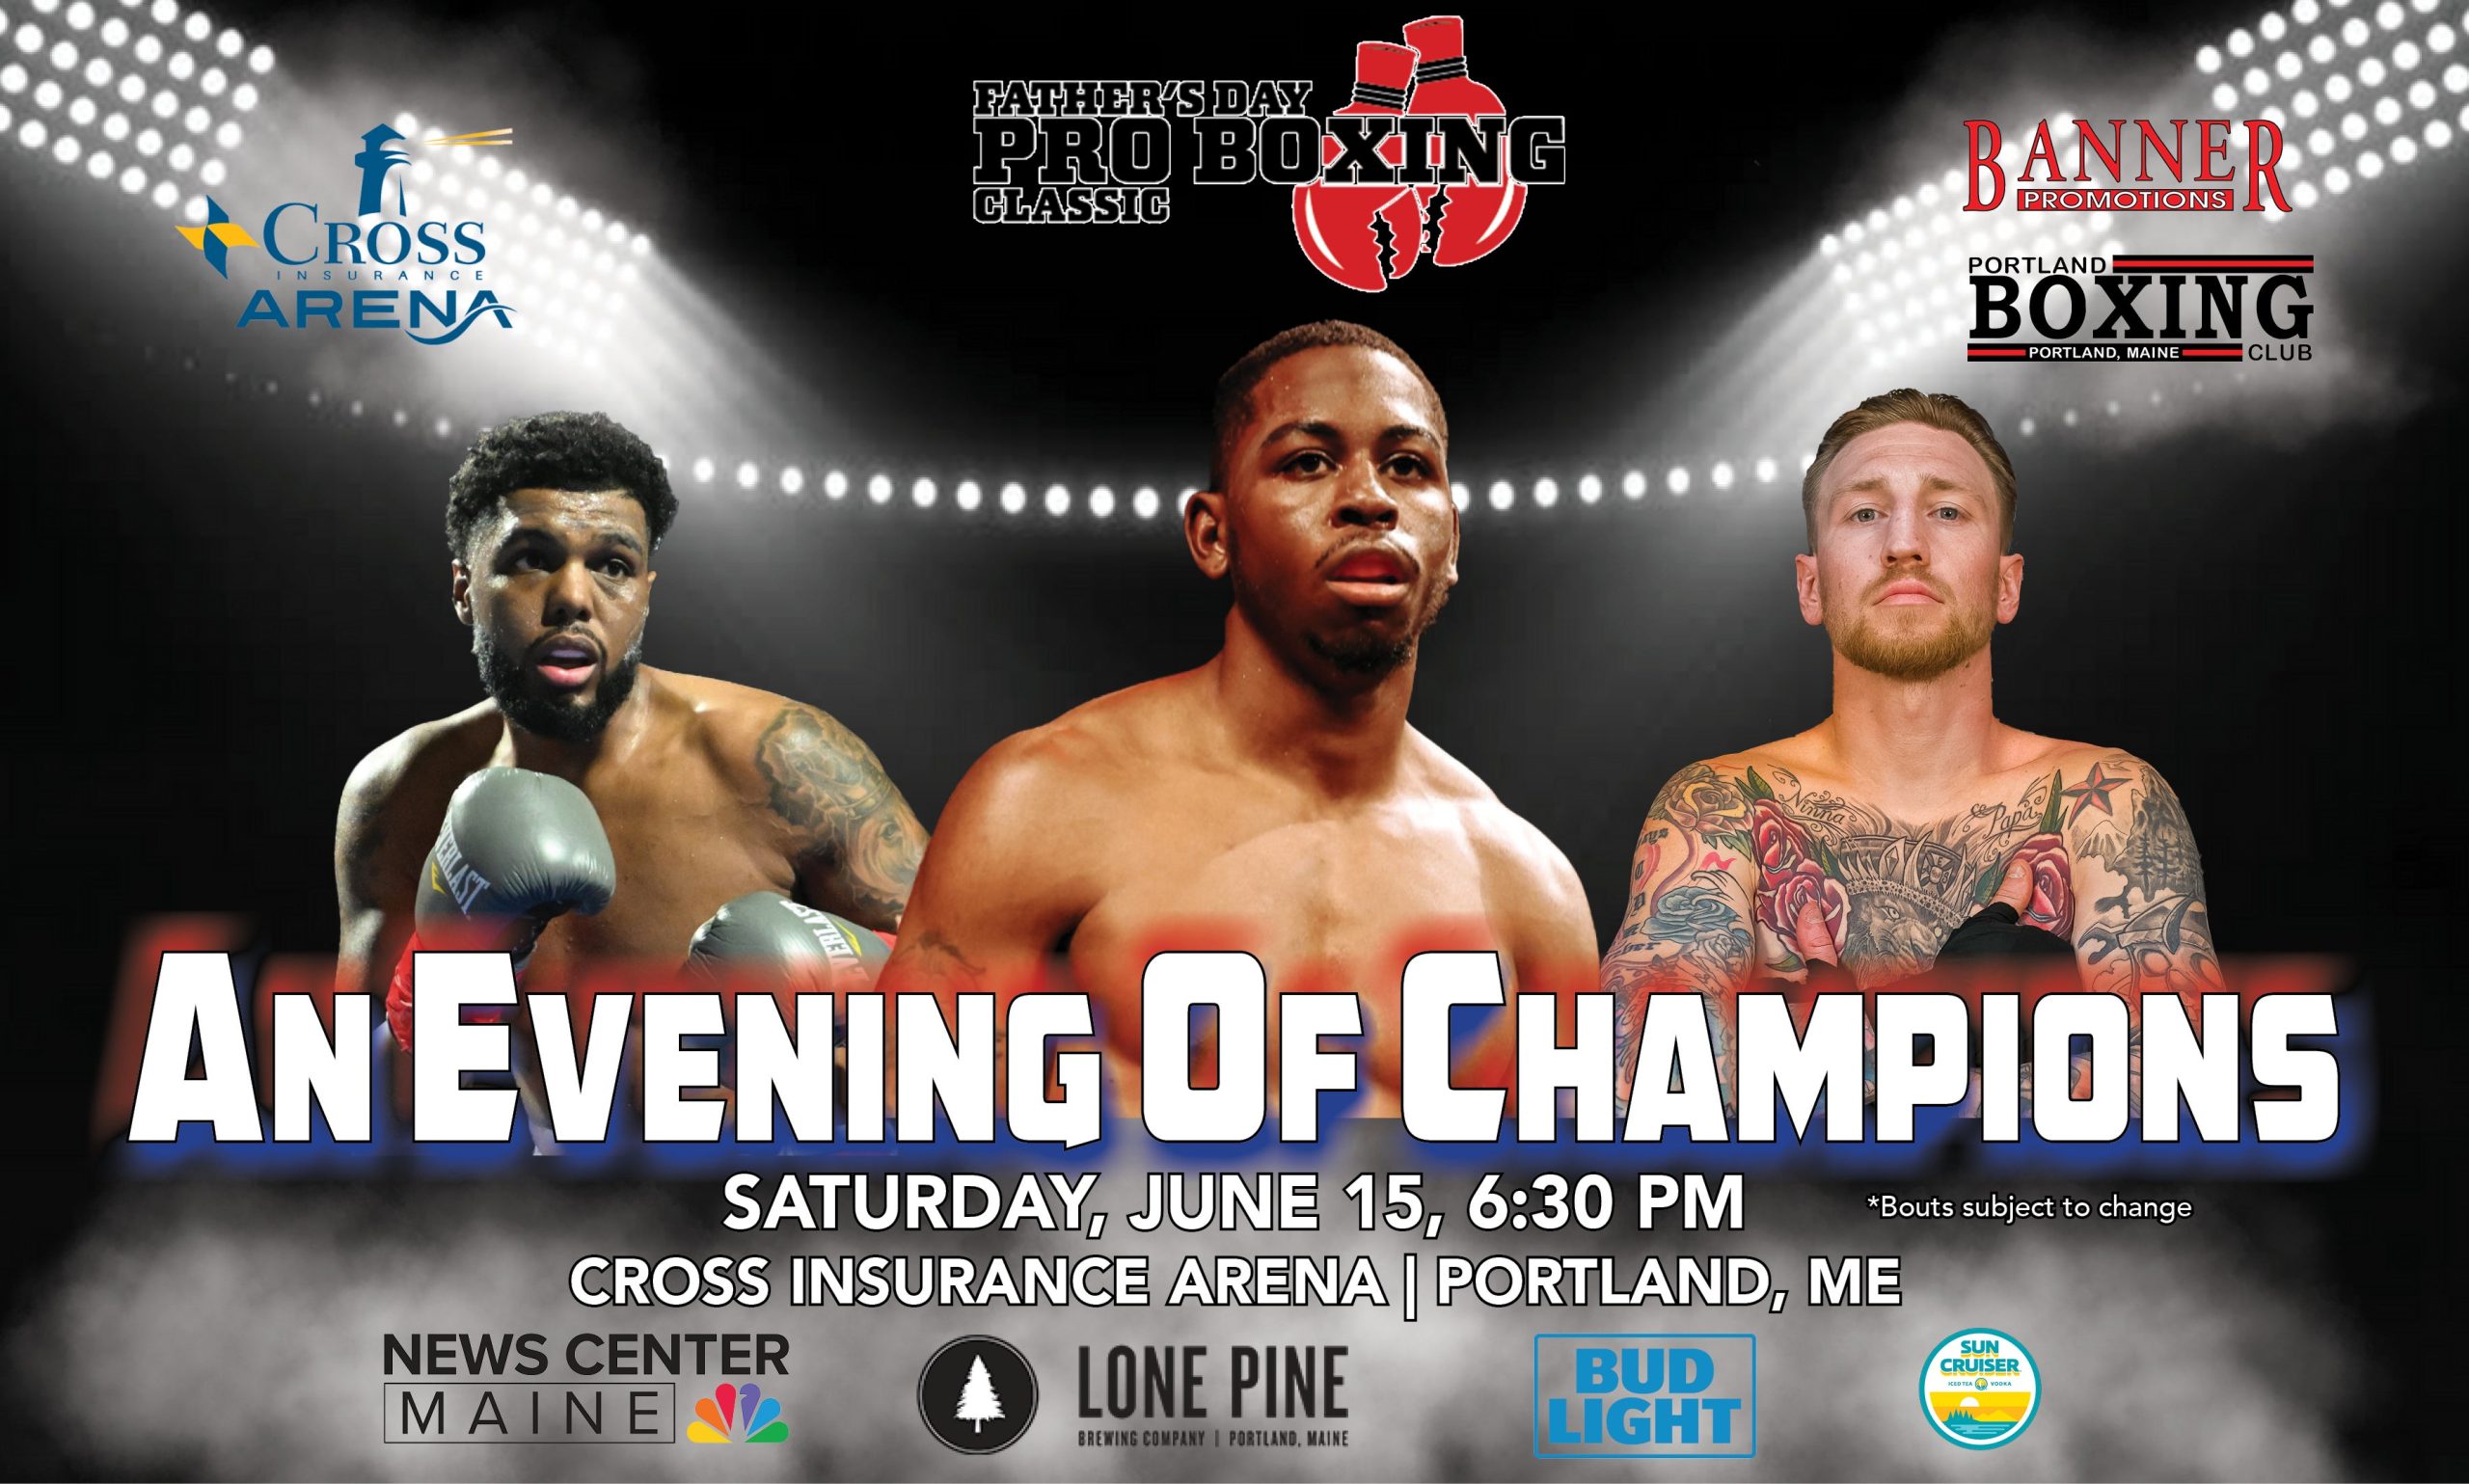 Win Tickets to Father’s Day Pro Boxing